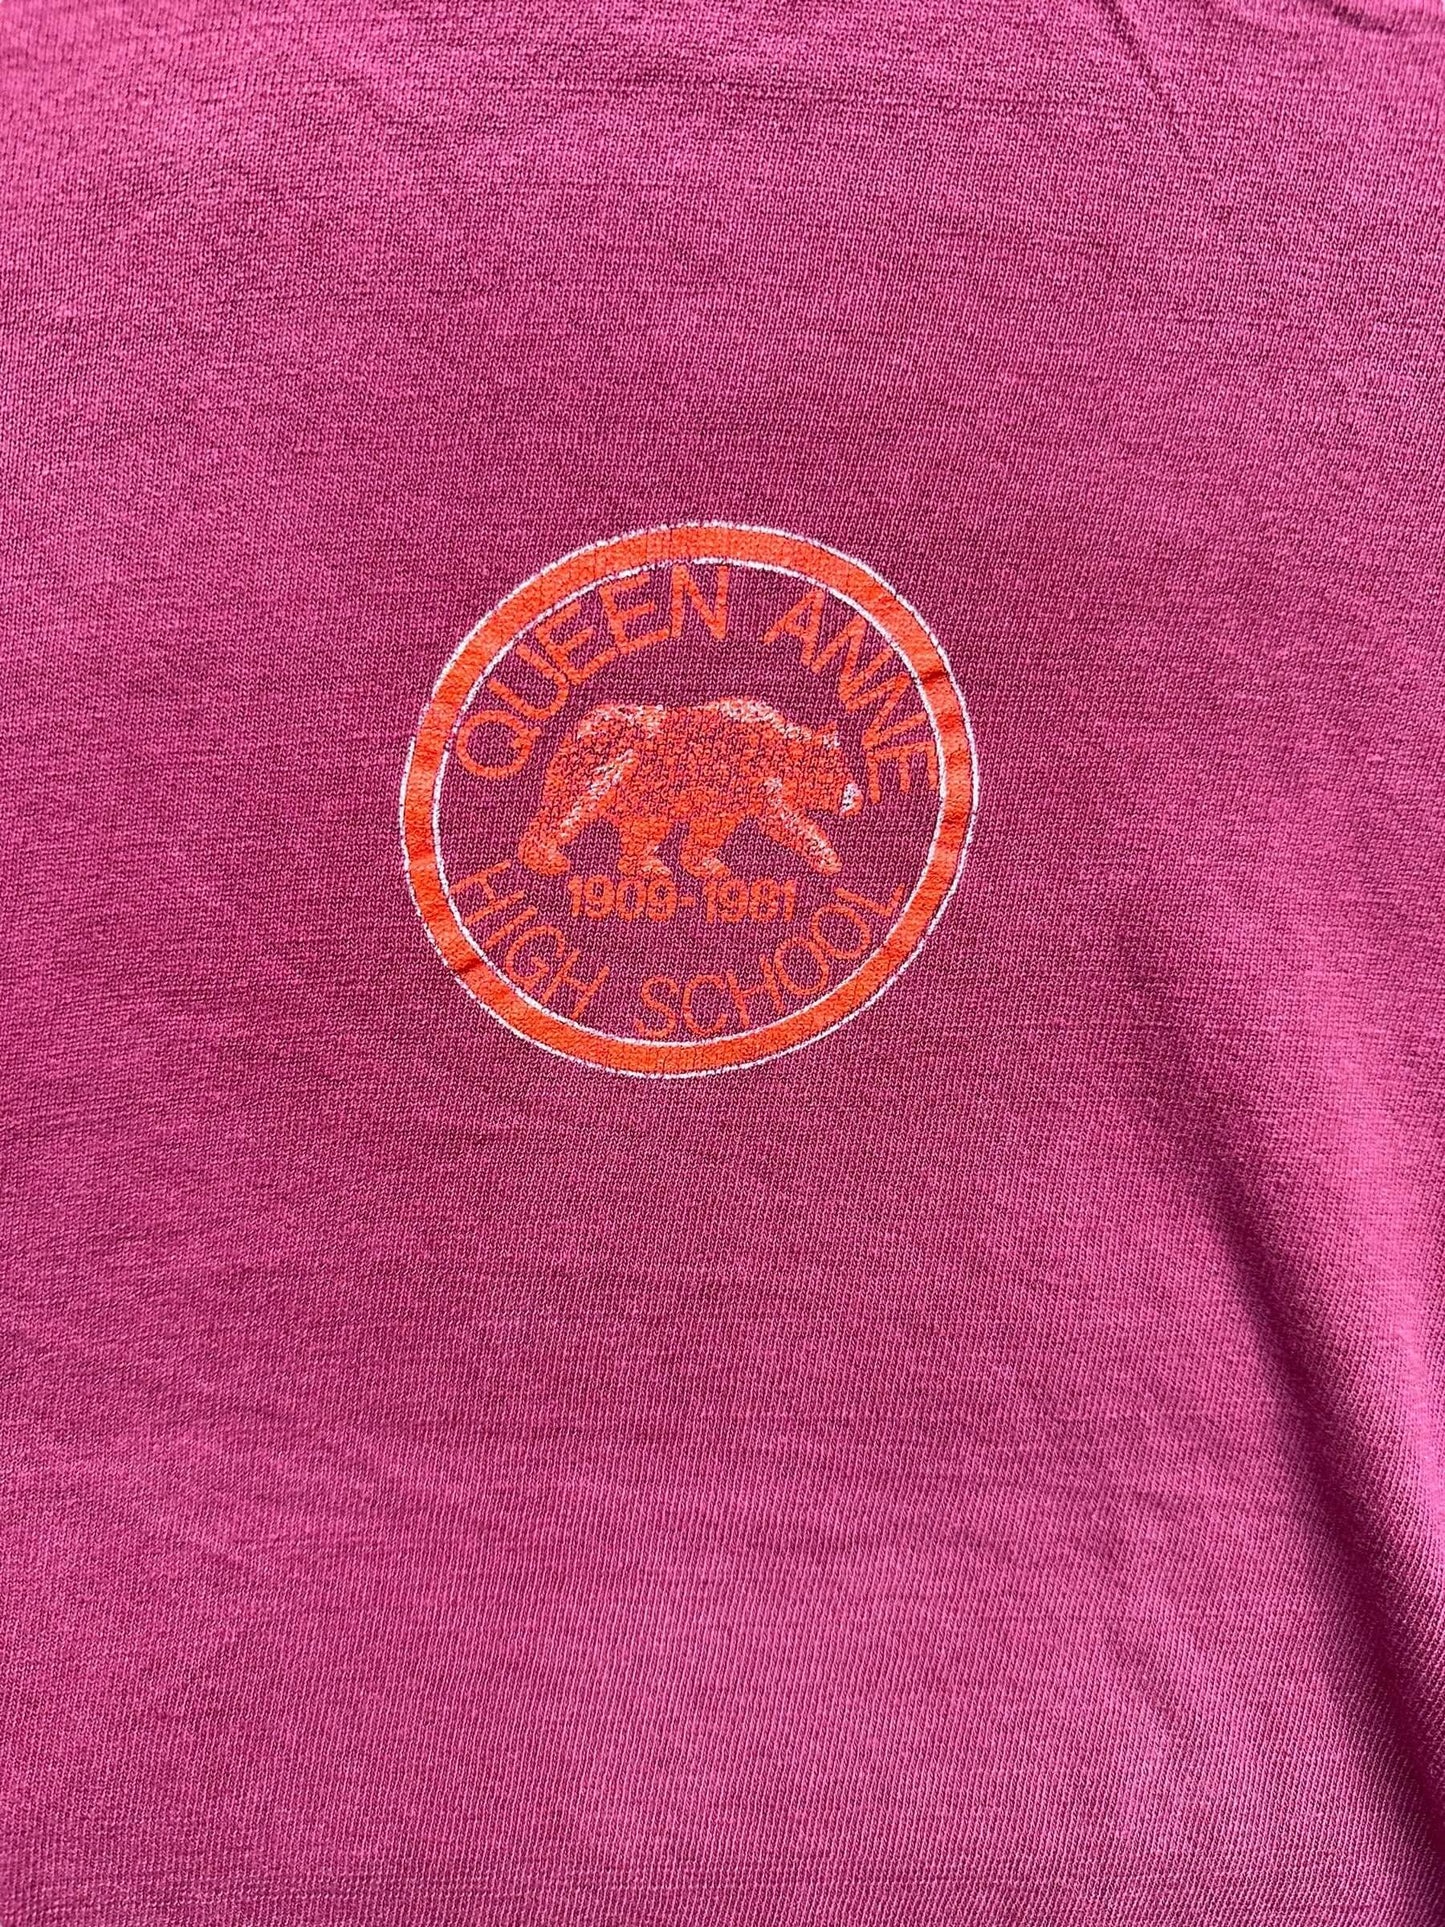 Close Up of Graphic on Vintage 1981 Queen Anne High Tee SZ L | Barn Owl Vintage Tees | Vintage Graphic Tees Seattle